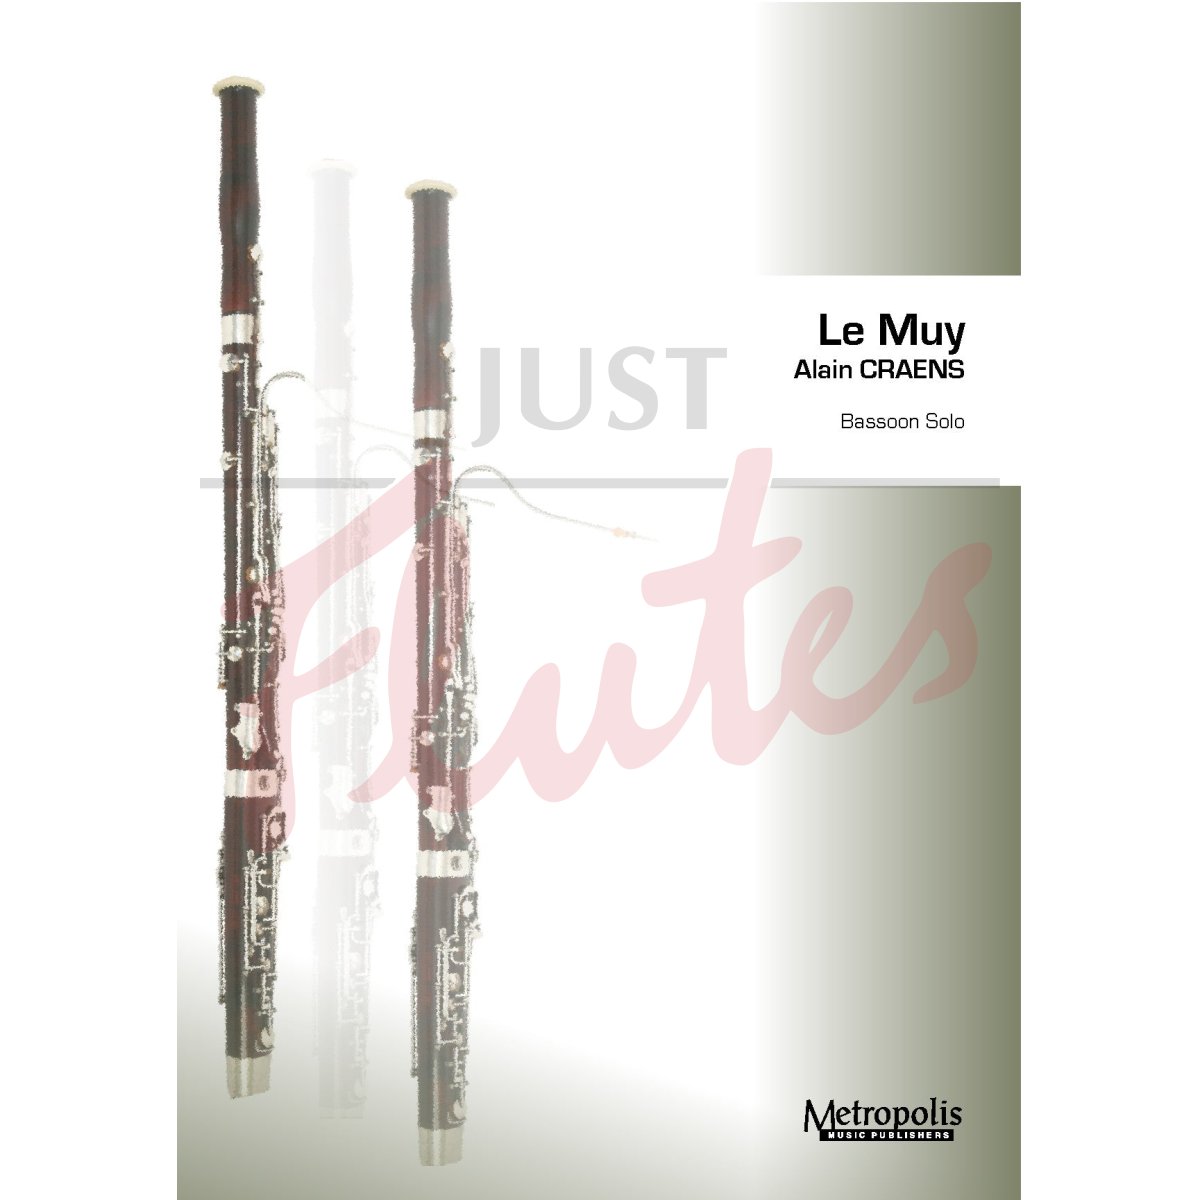 Le Muy for Solo Bassoon